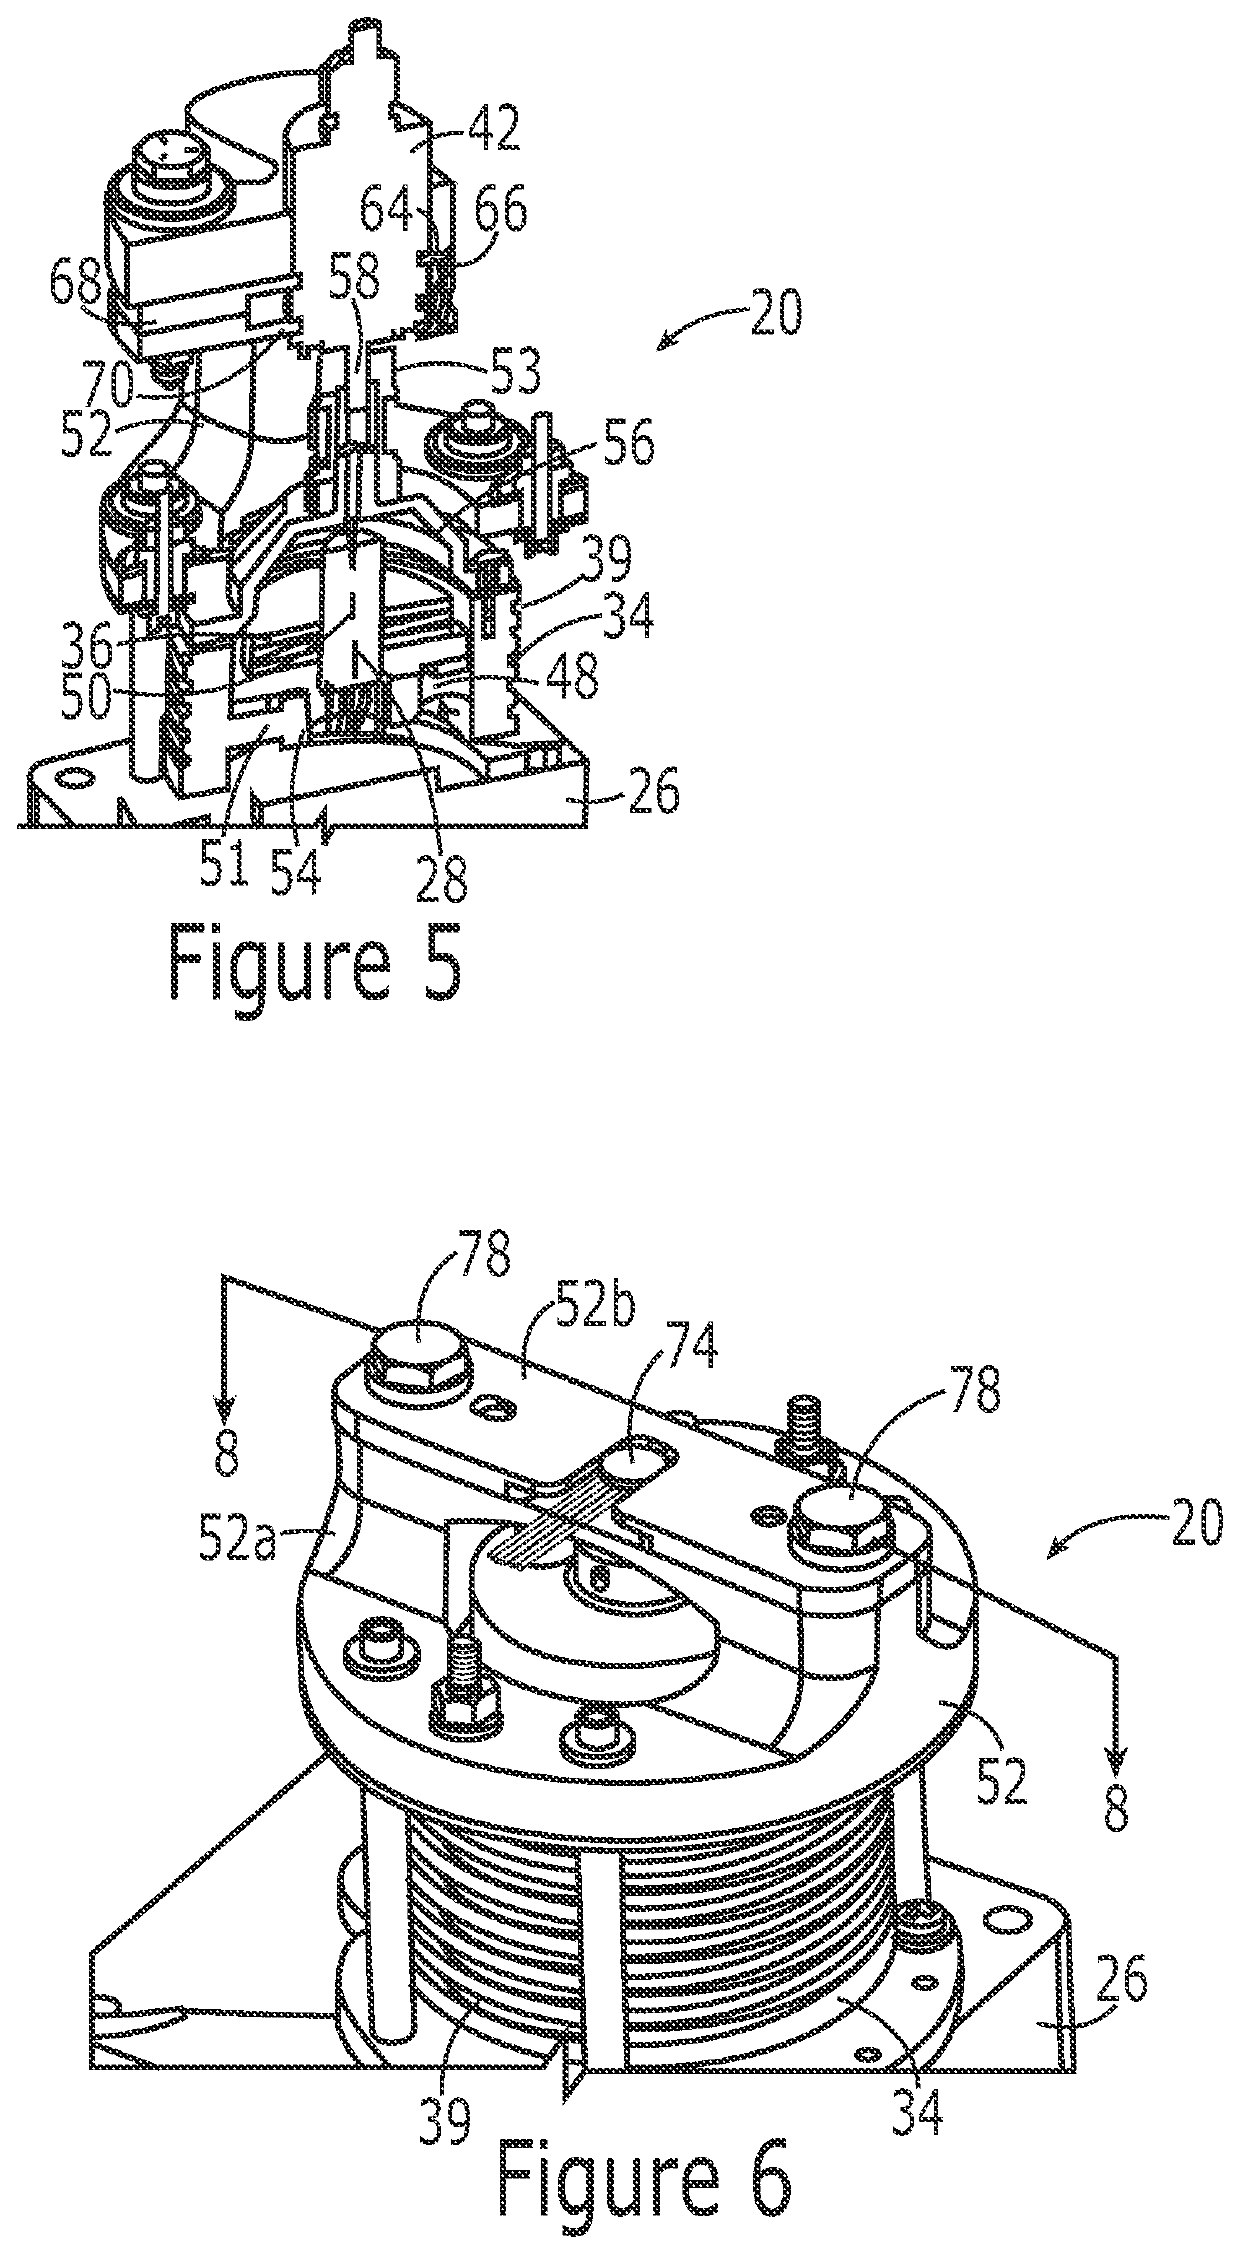 Control system and method to detect clutch slippage